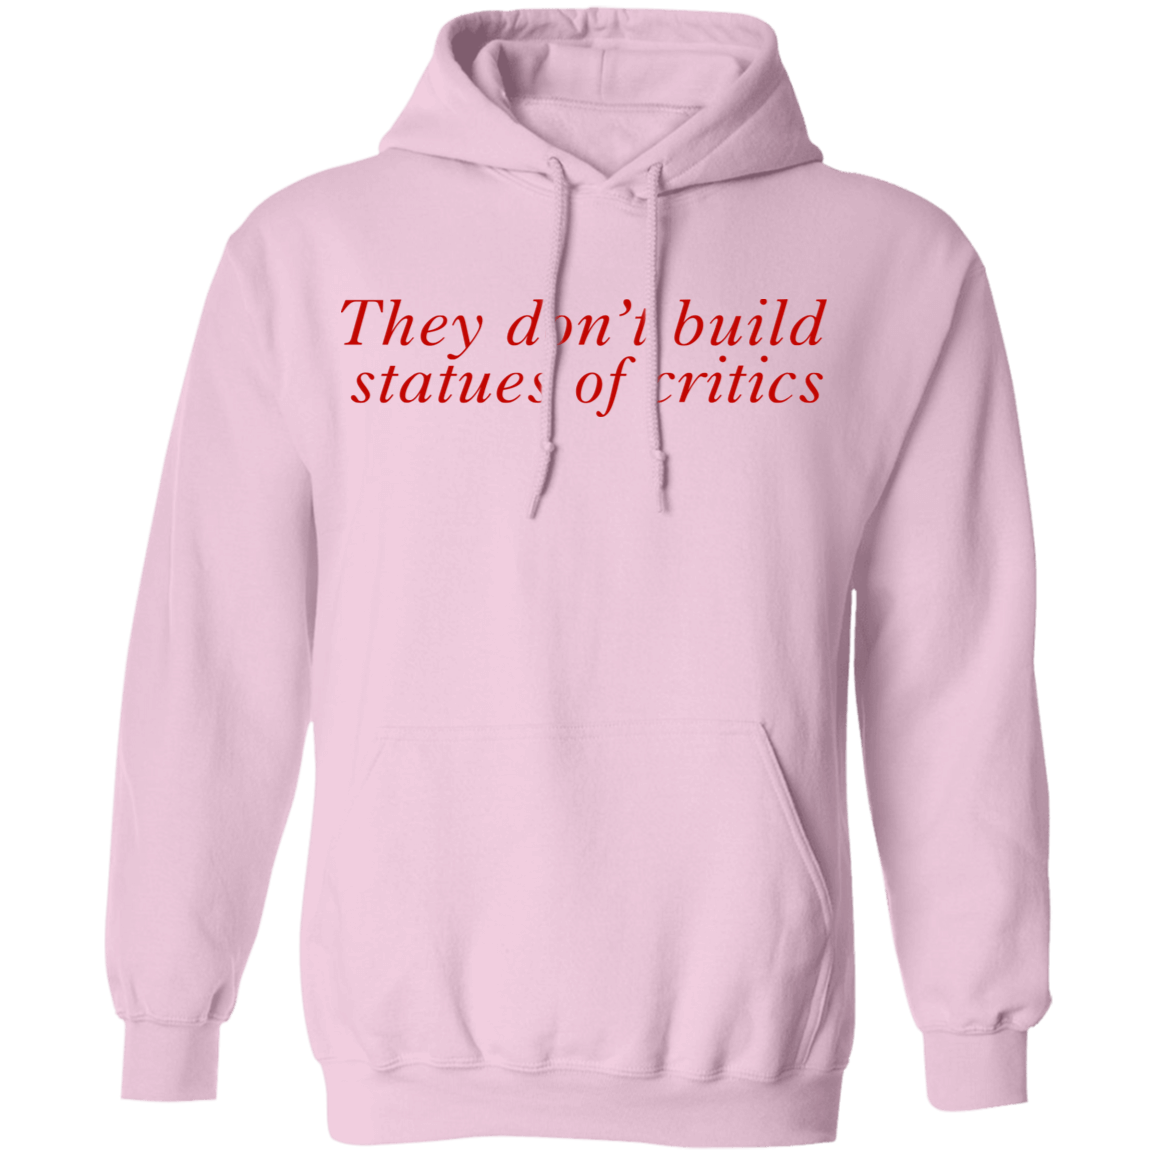 Charli Xcx Updates They Don’t Build Statues Of Critics Hoodie